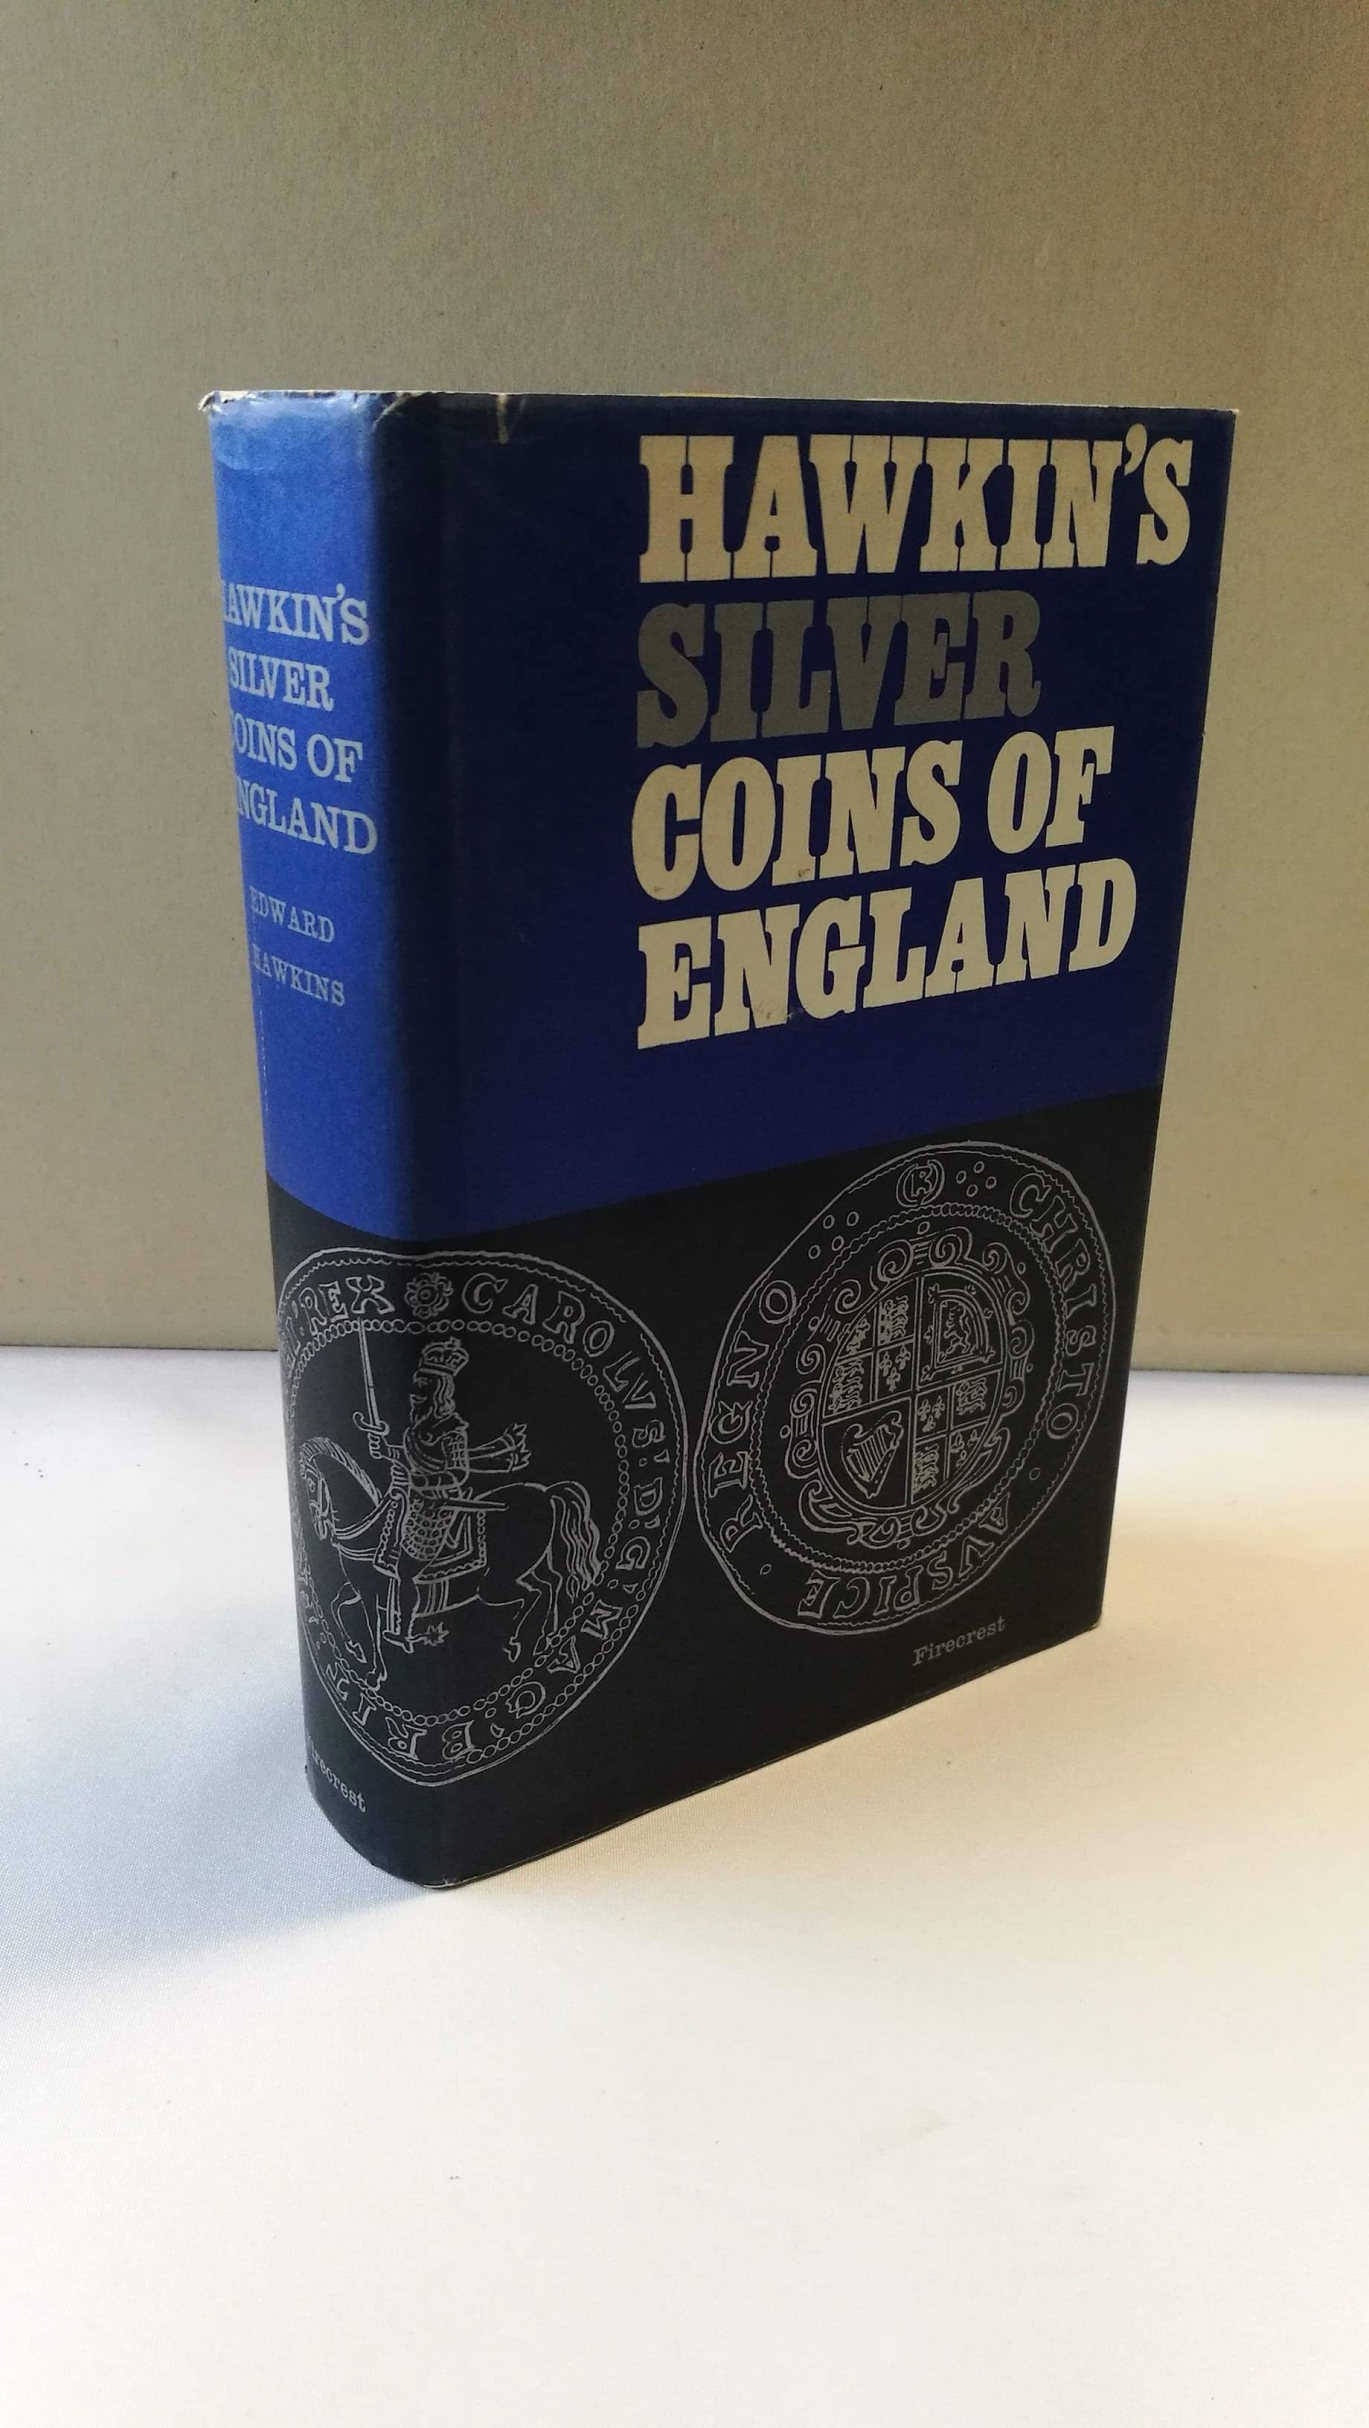 Hawkins, Edward: The Silver Coins of England